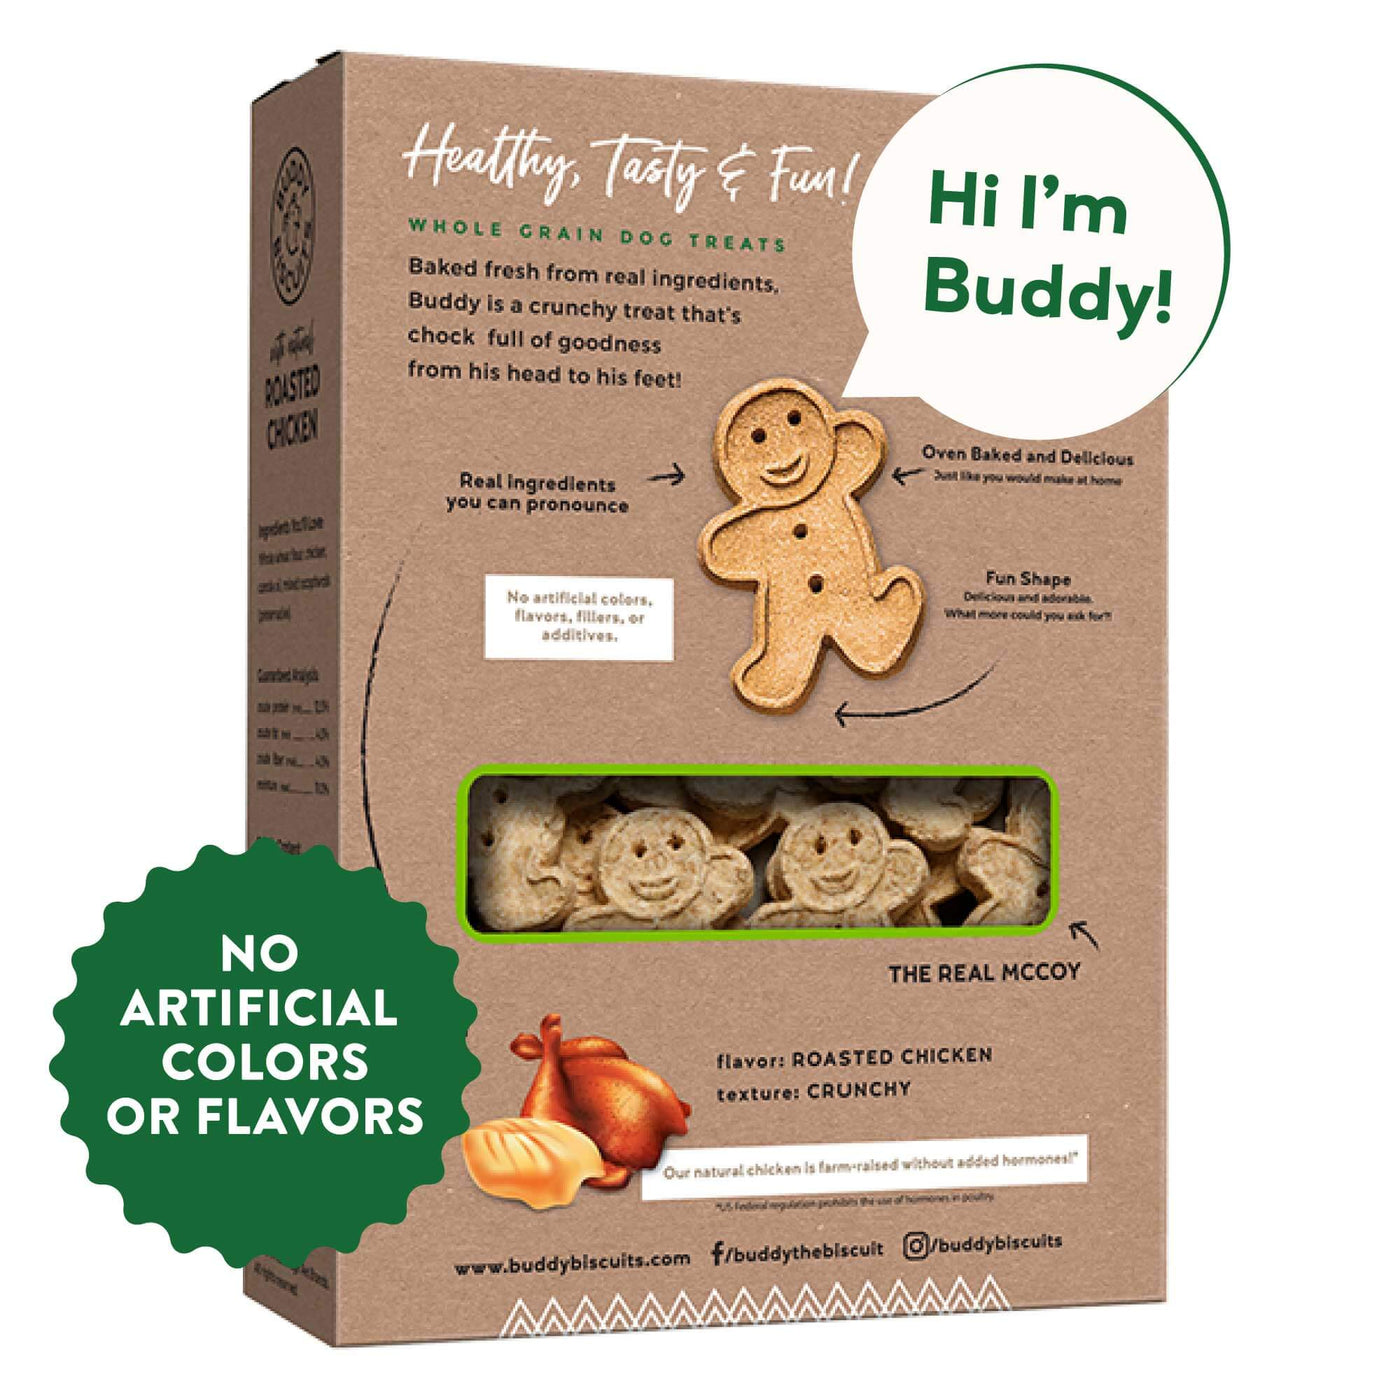 Roasted Chicken Healthy Whole Grain Oven Baked  Dog Treats - Buddy Biscuits